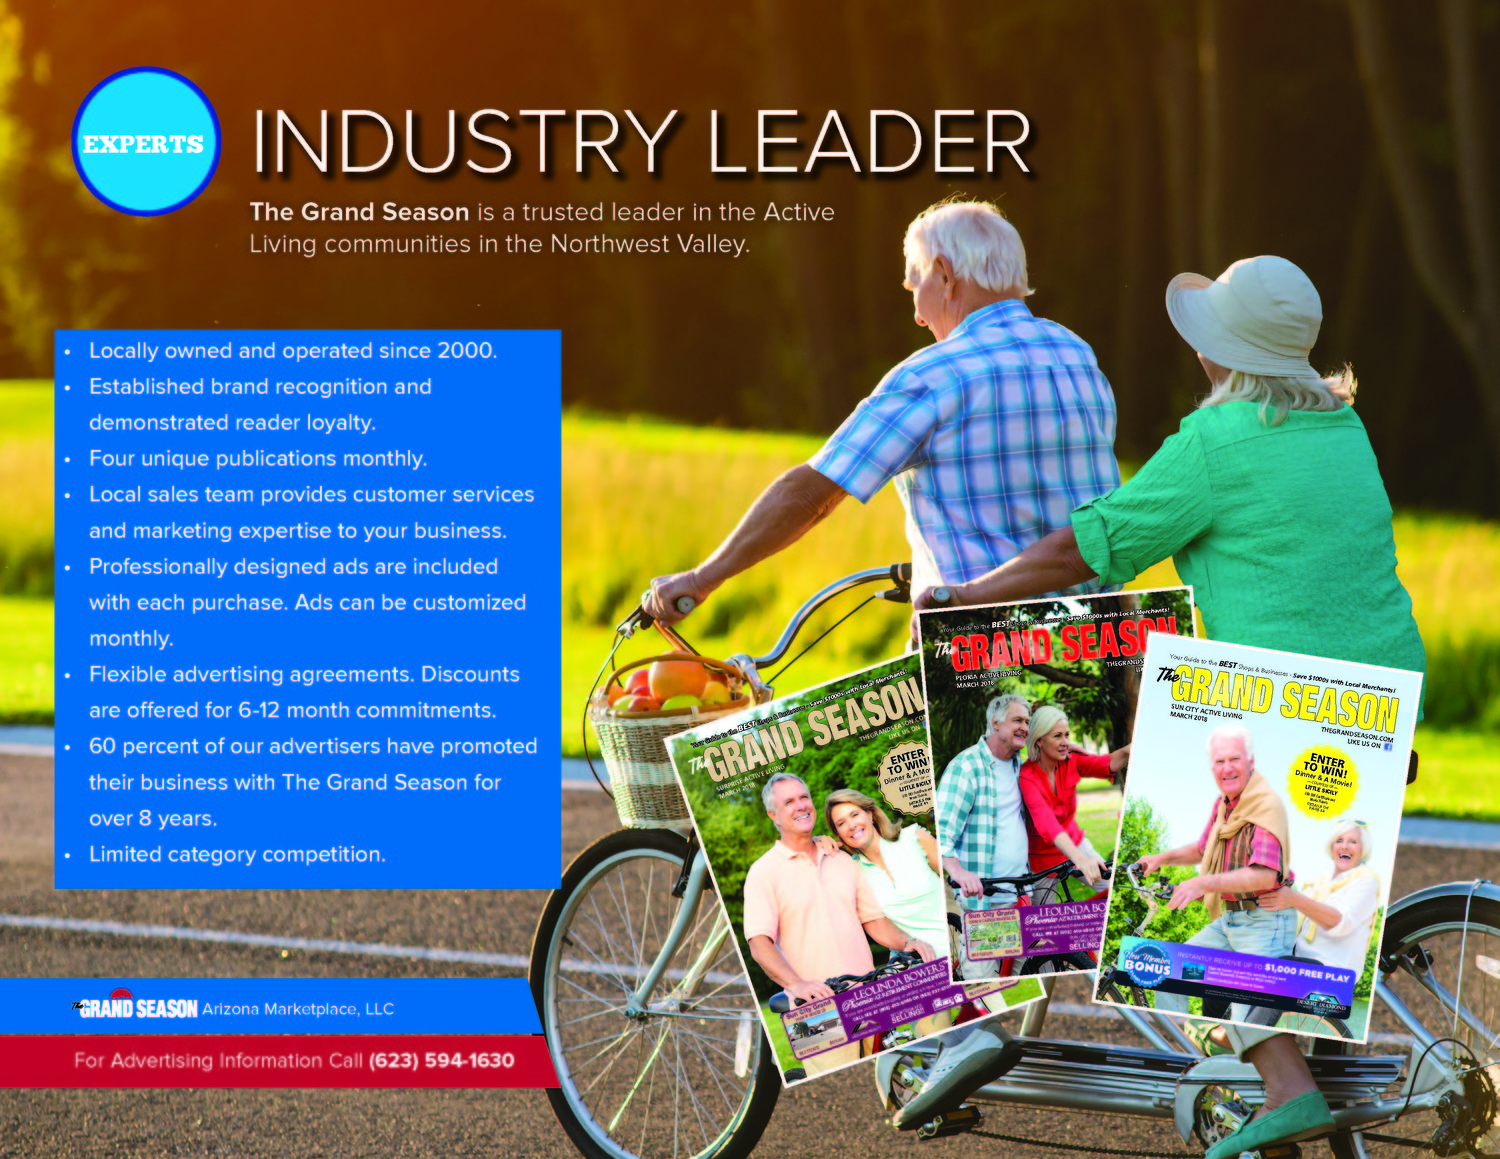 A Proven Leader in Active Living Communities.